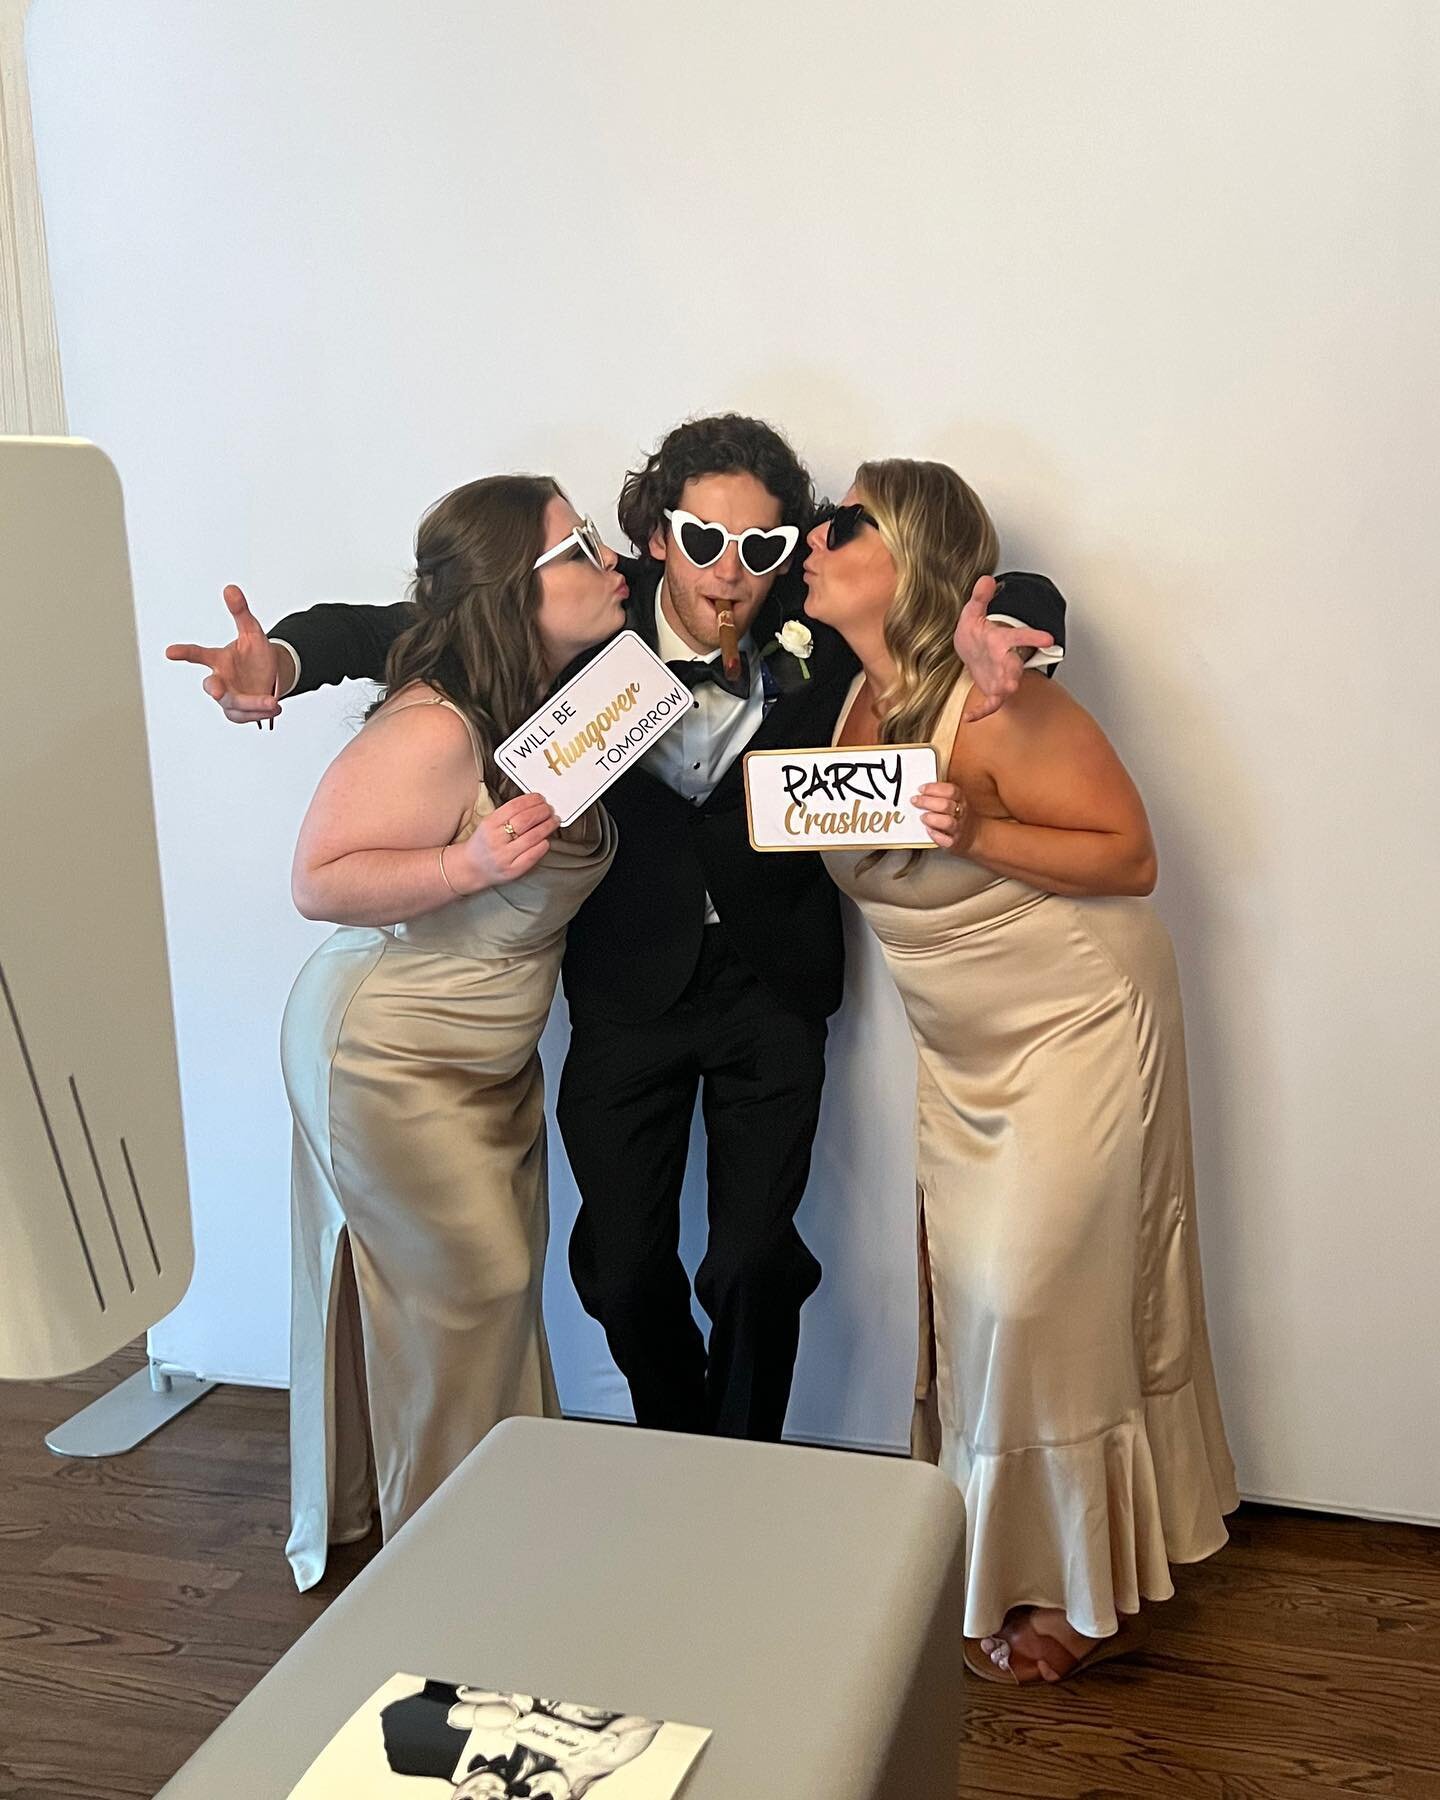 No seriously, we bring the entertainment to your party. Your guests deserve to feel like stars, take all the photos and have a wonderful experience. 
.
.
.
#photoboothatlanta 
#atlantaphotobooth
#audioguestbookatlanta